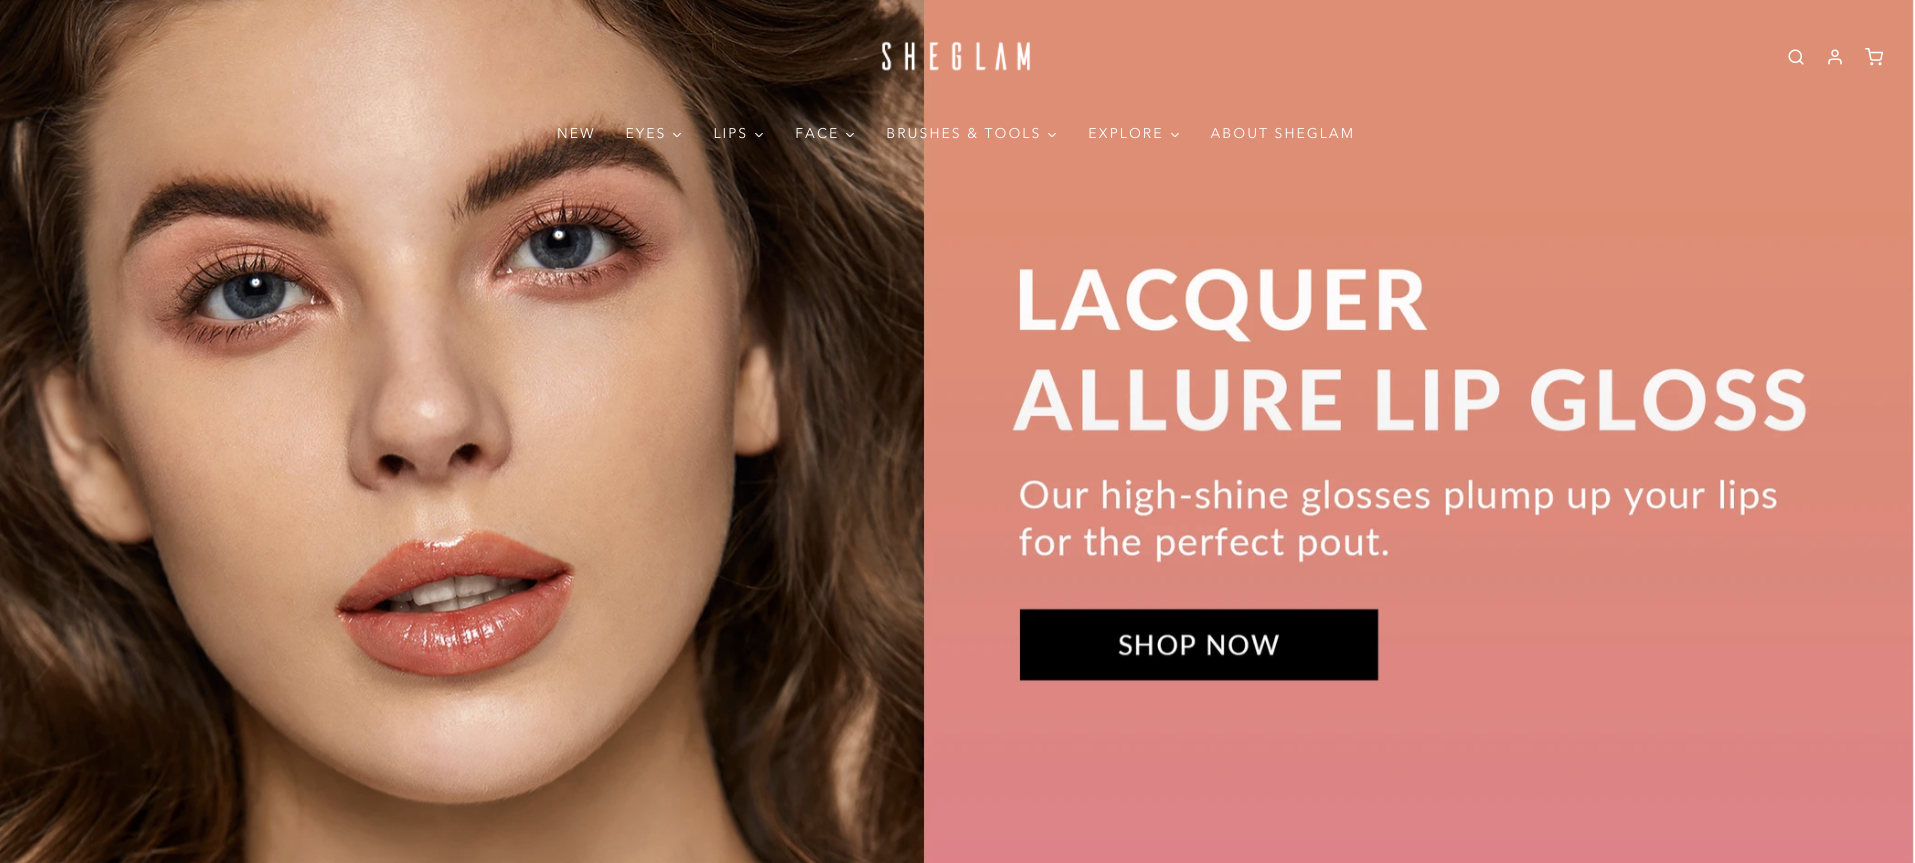 SHEIN launched an independent beauty site SHEGLAM